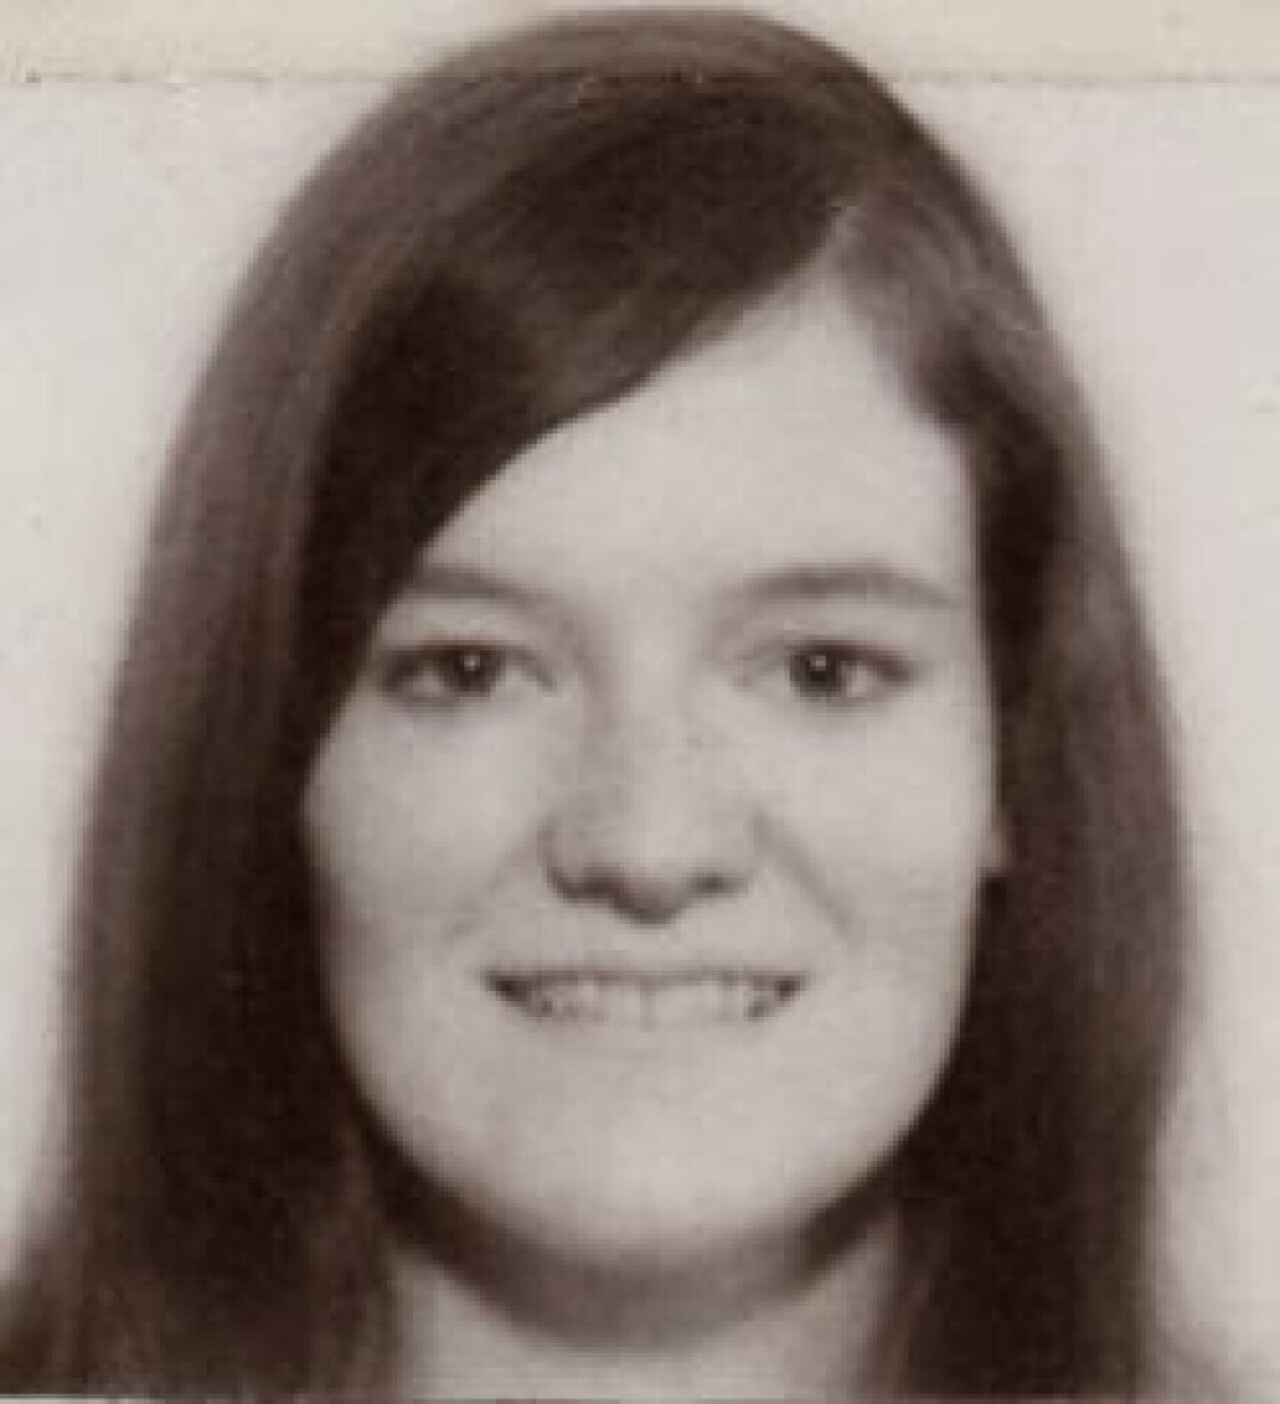 [IMAGE] Burlington, Vermont police solve more than 50-year-old cold case ...